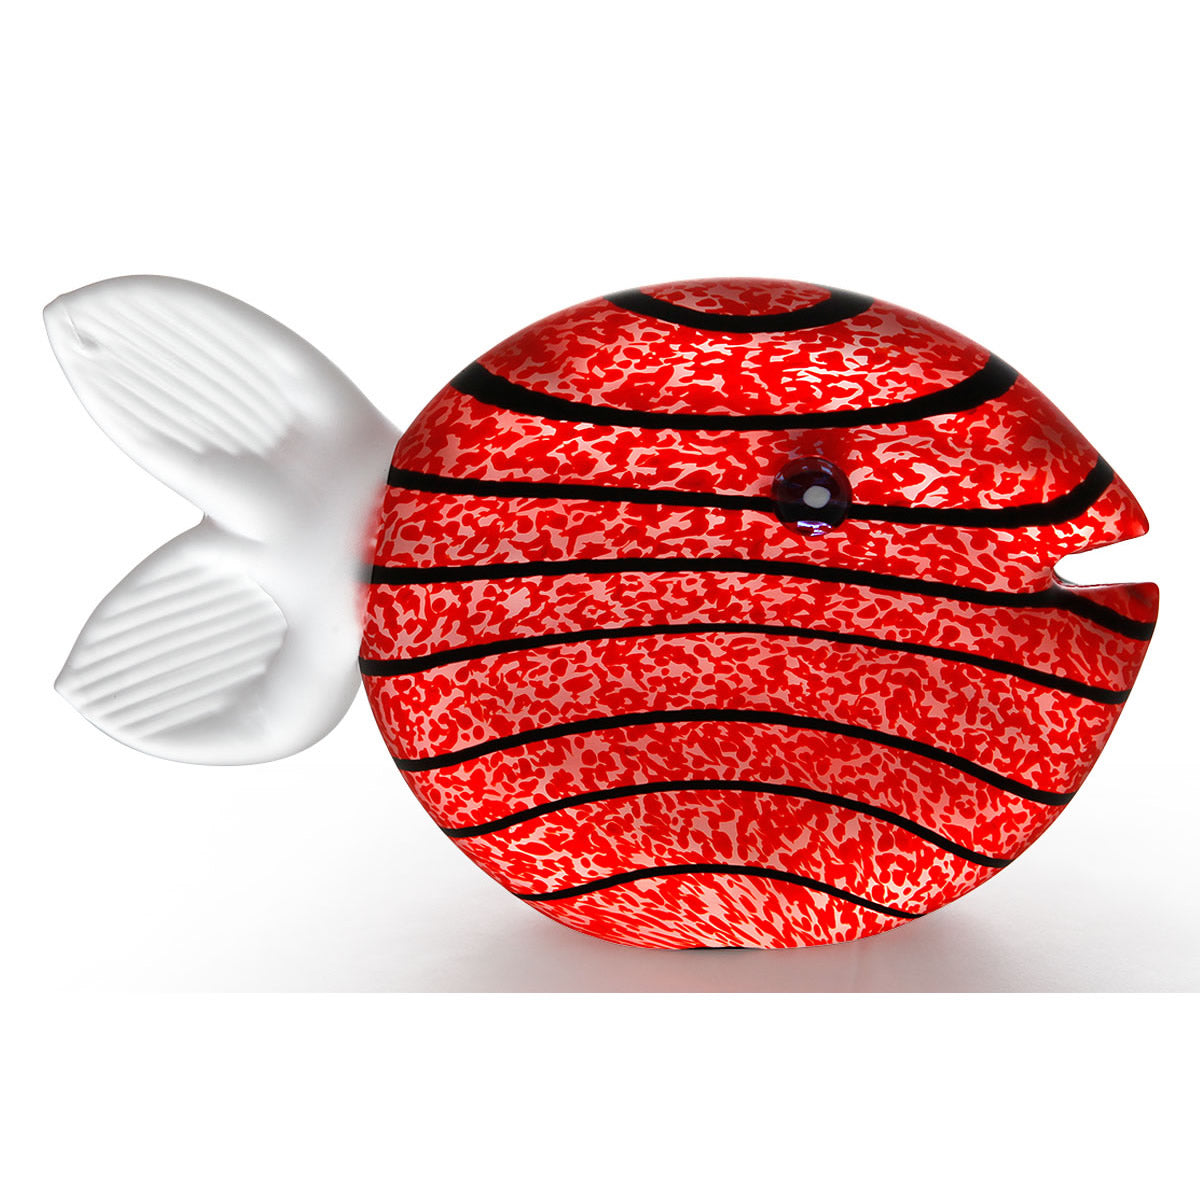 Snippy Fish Paperweight, Large/Red- by Borowski